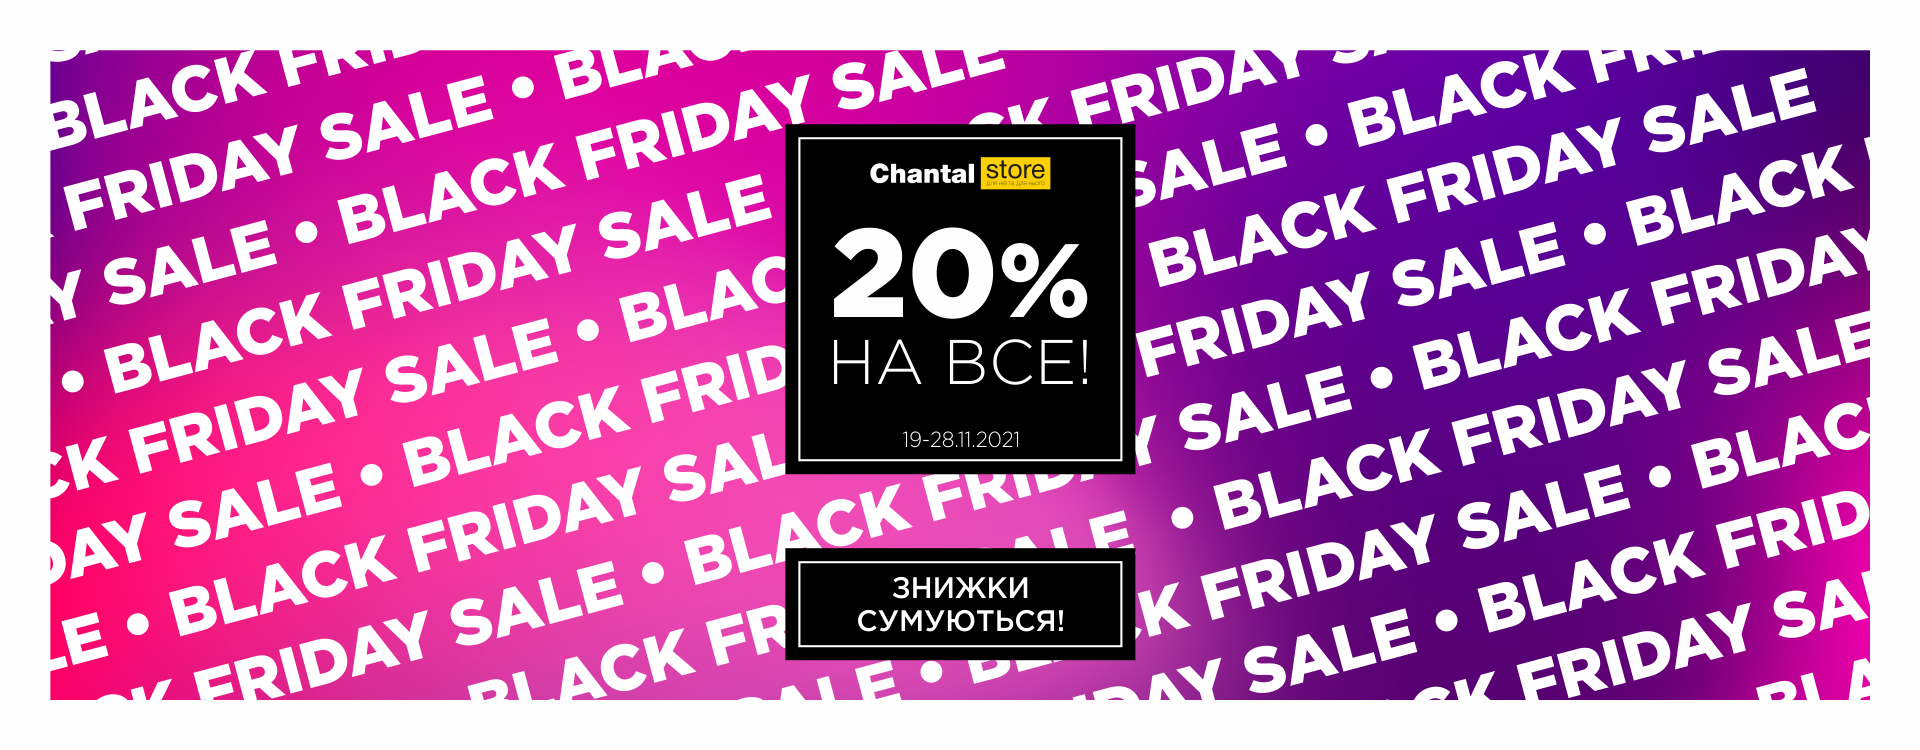 Black Friday in the Chantal Store has started